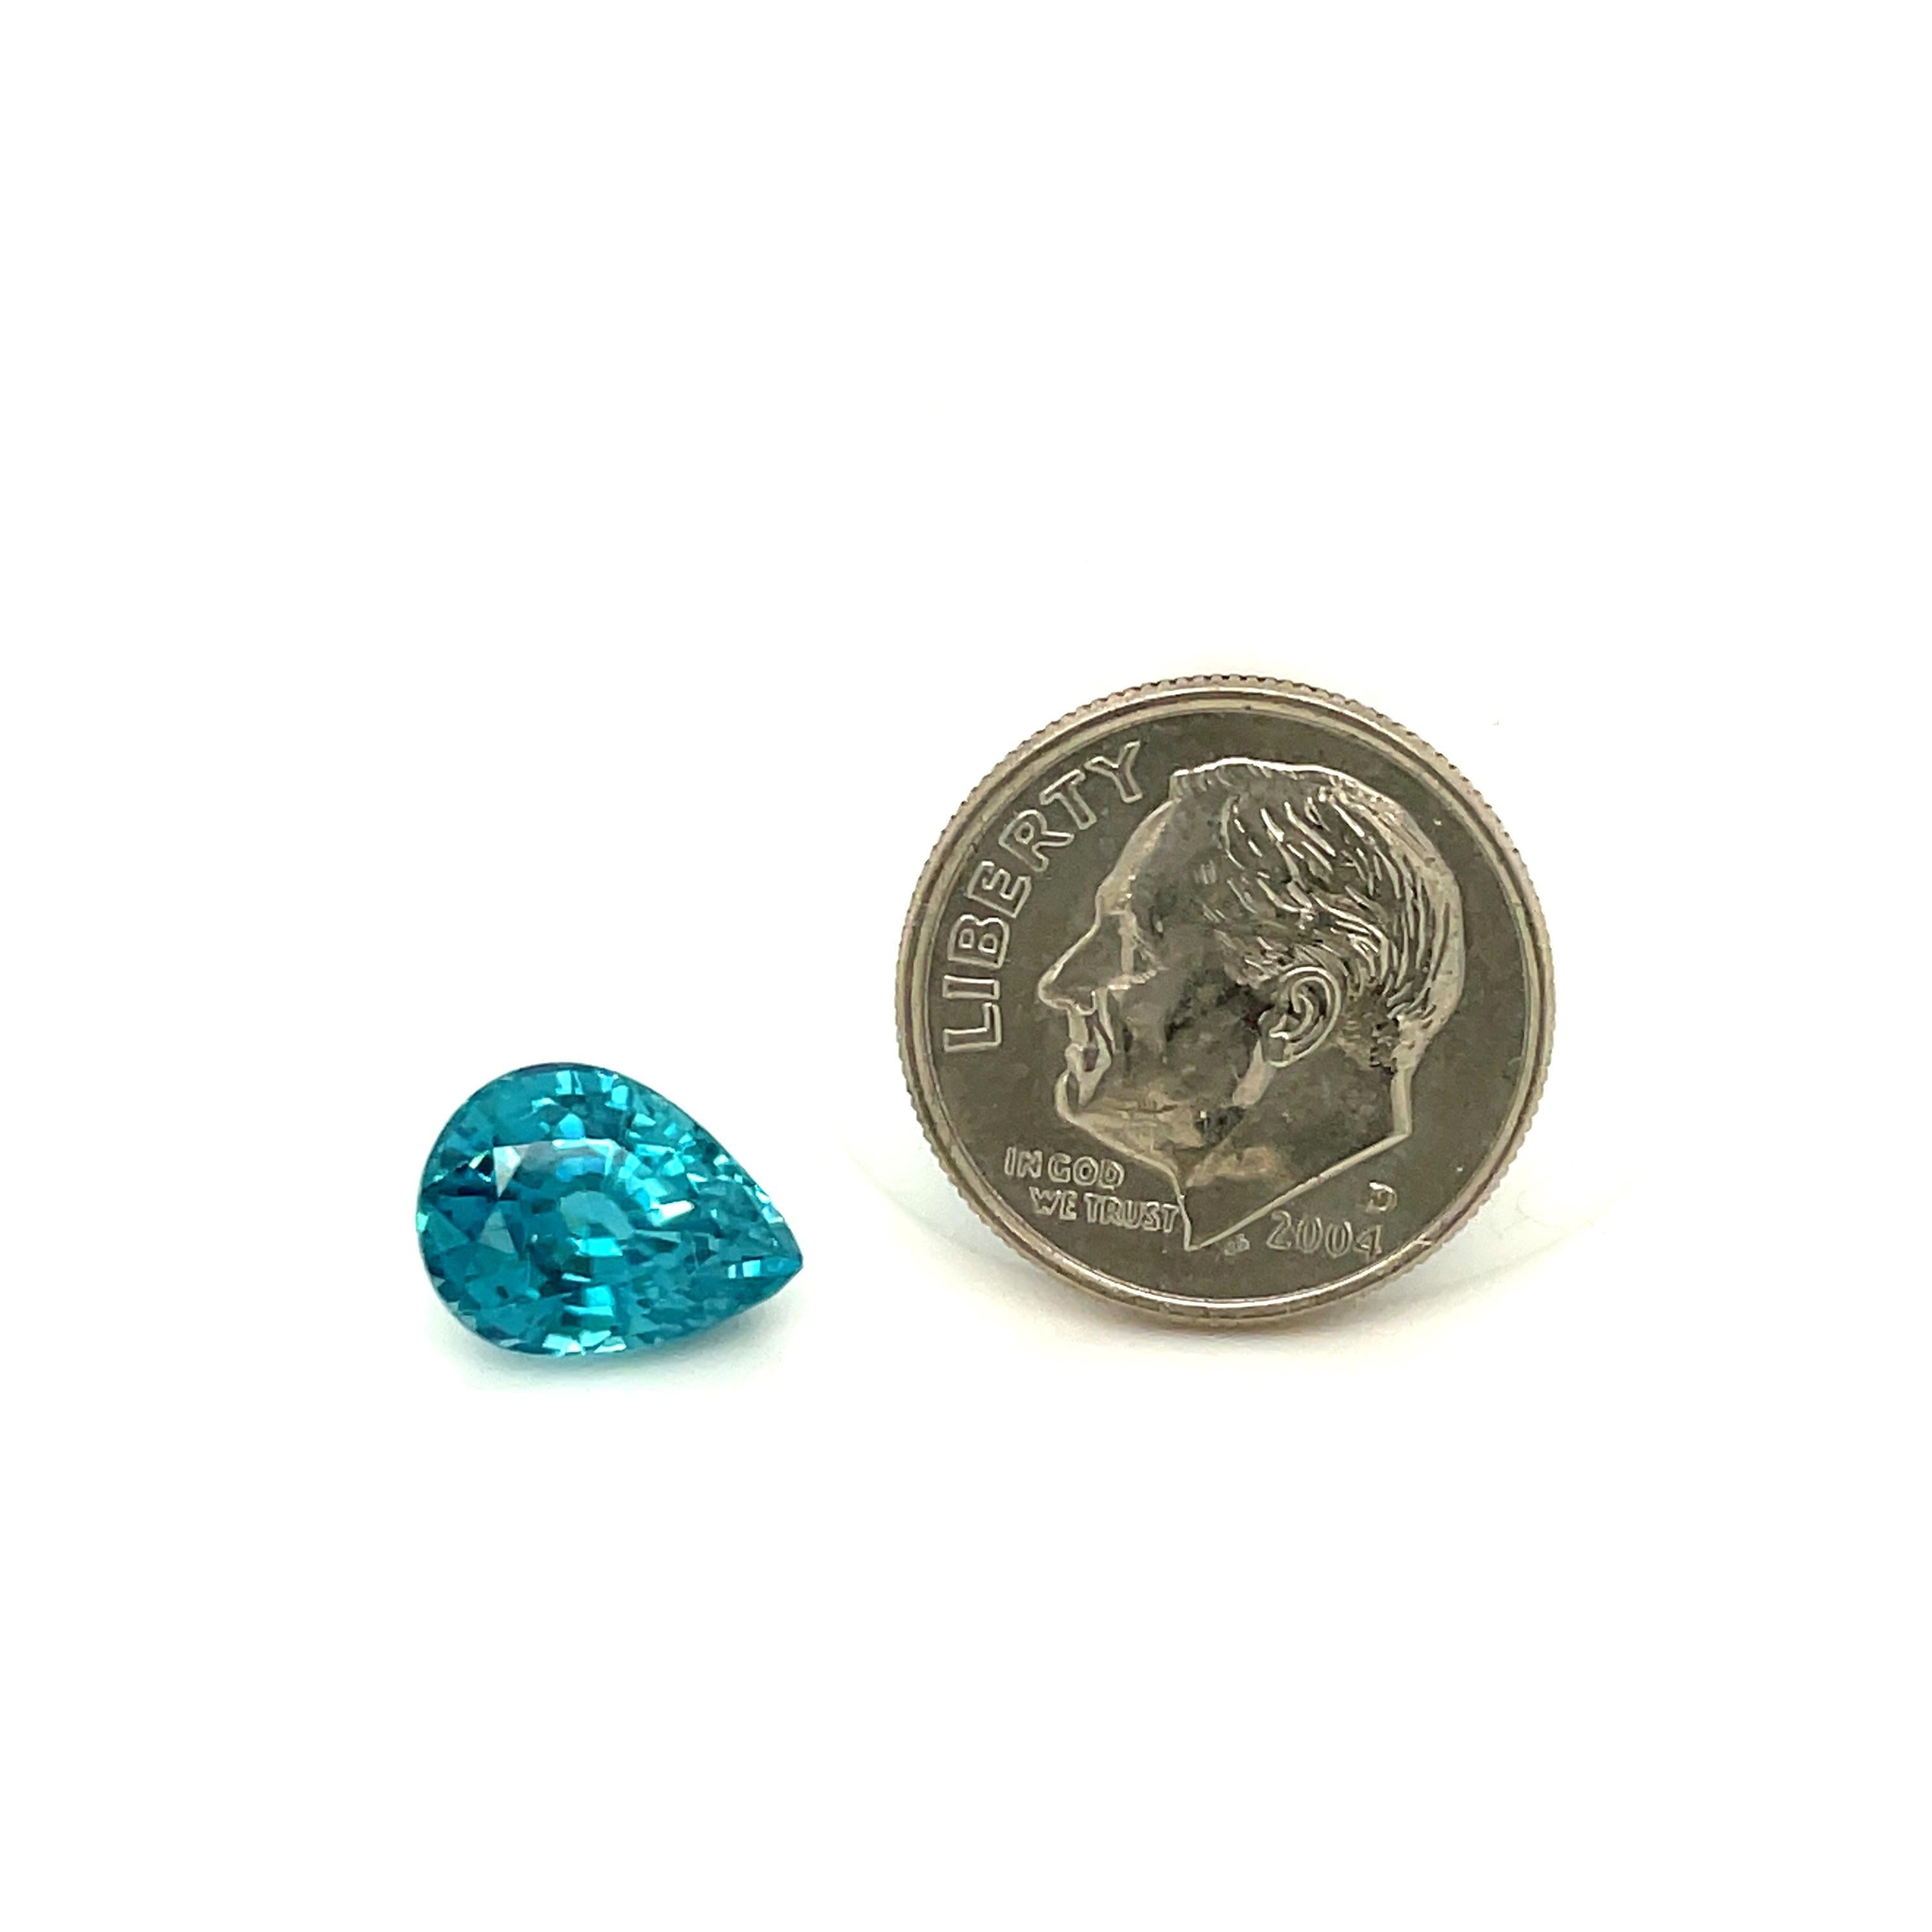 4.72 Carat Pear Shaped Blue Zircon, Unset Loose Gemstone  For Sale 4